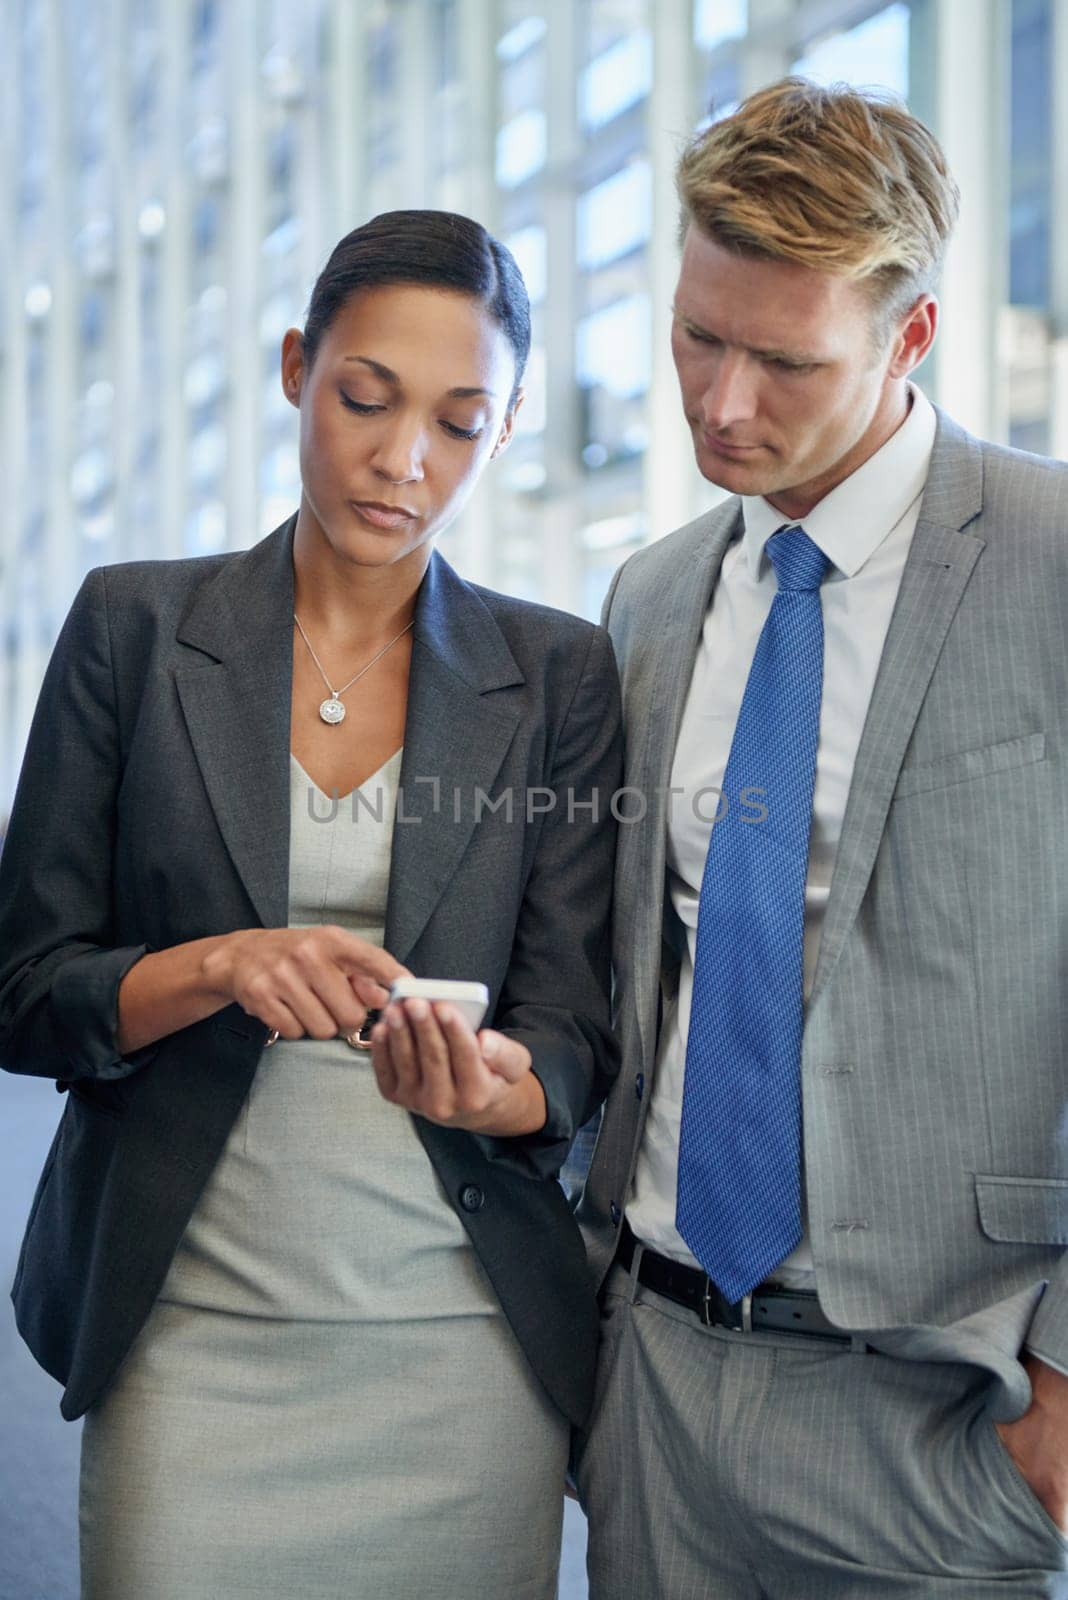 Using technology to further their business. two business colleagues standing and looking at something on a mobile phone